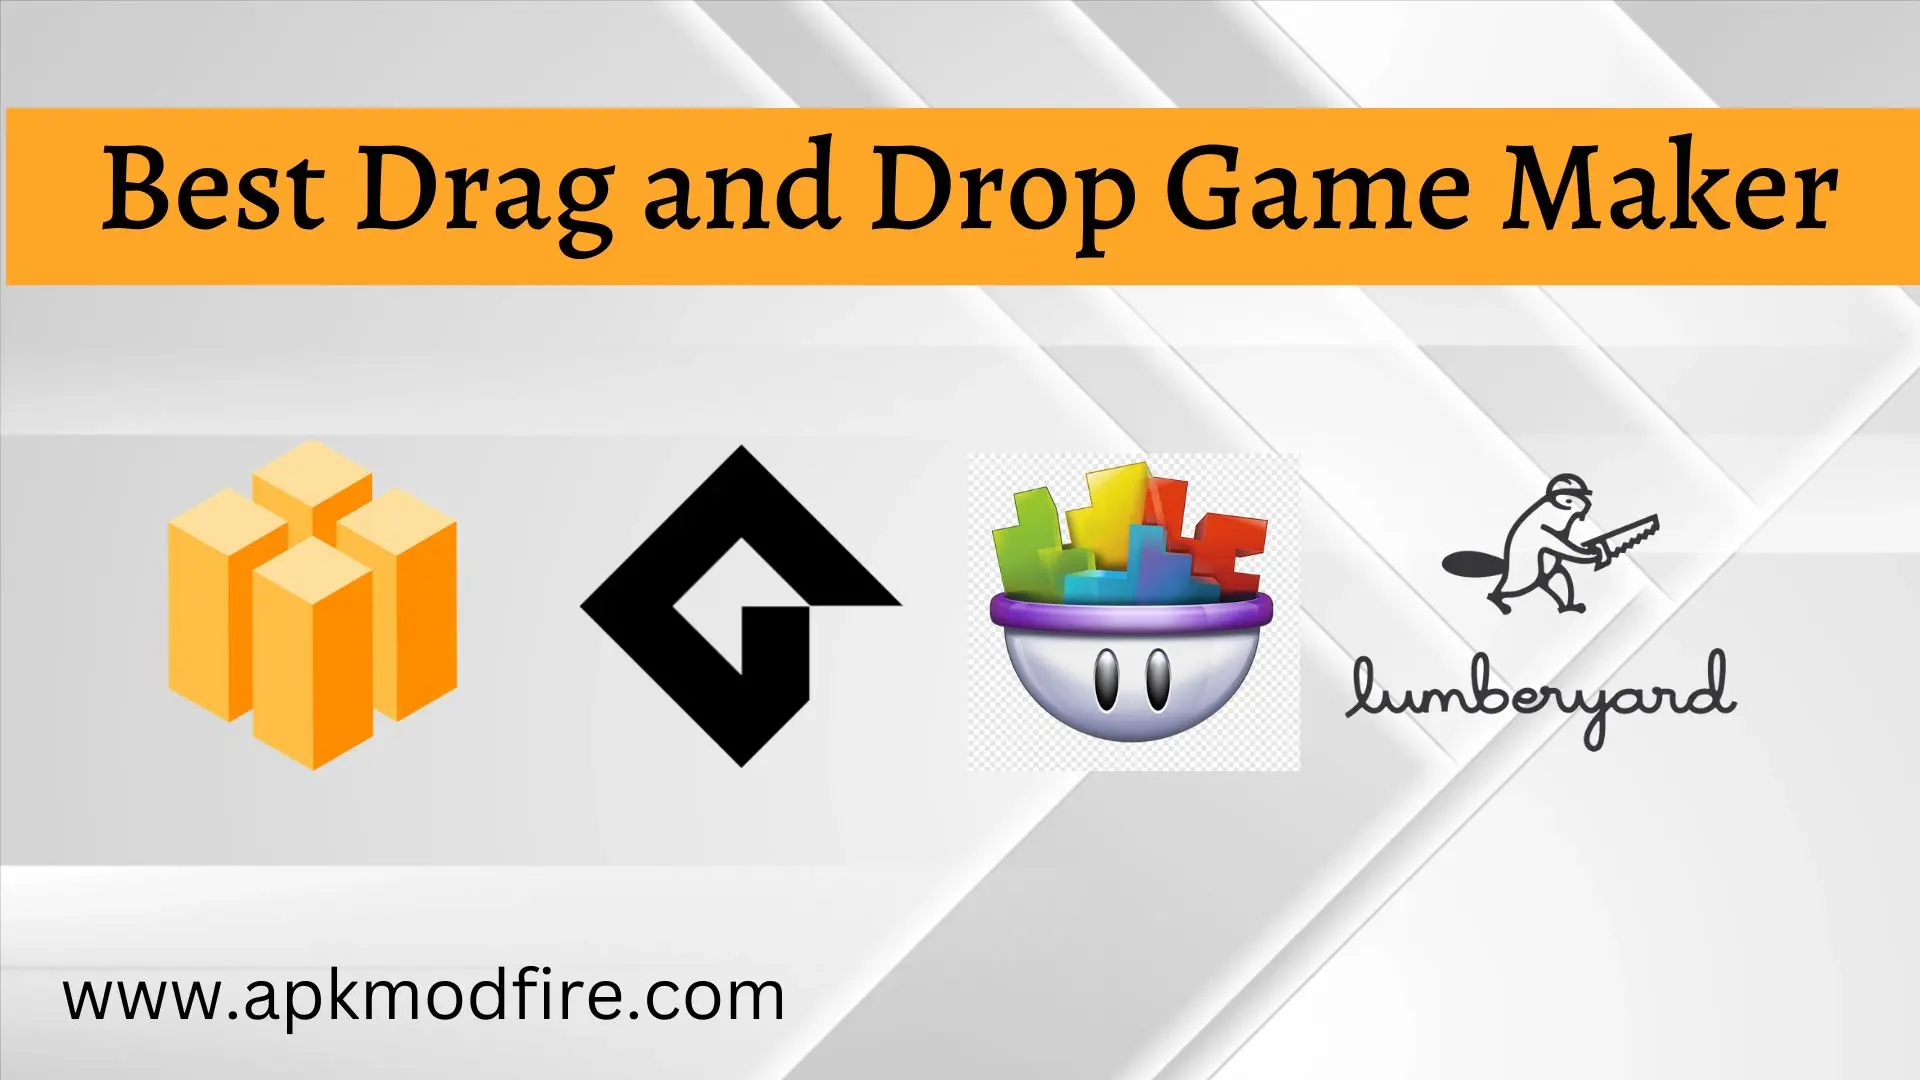 6 Best Drag and Drop Game Maker